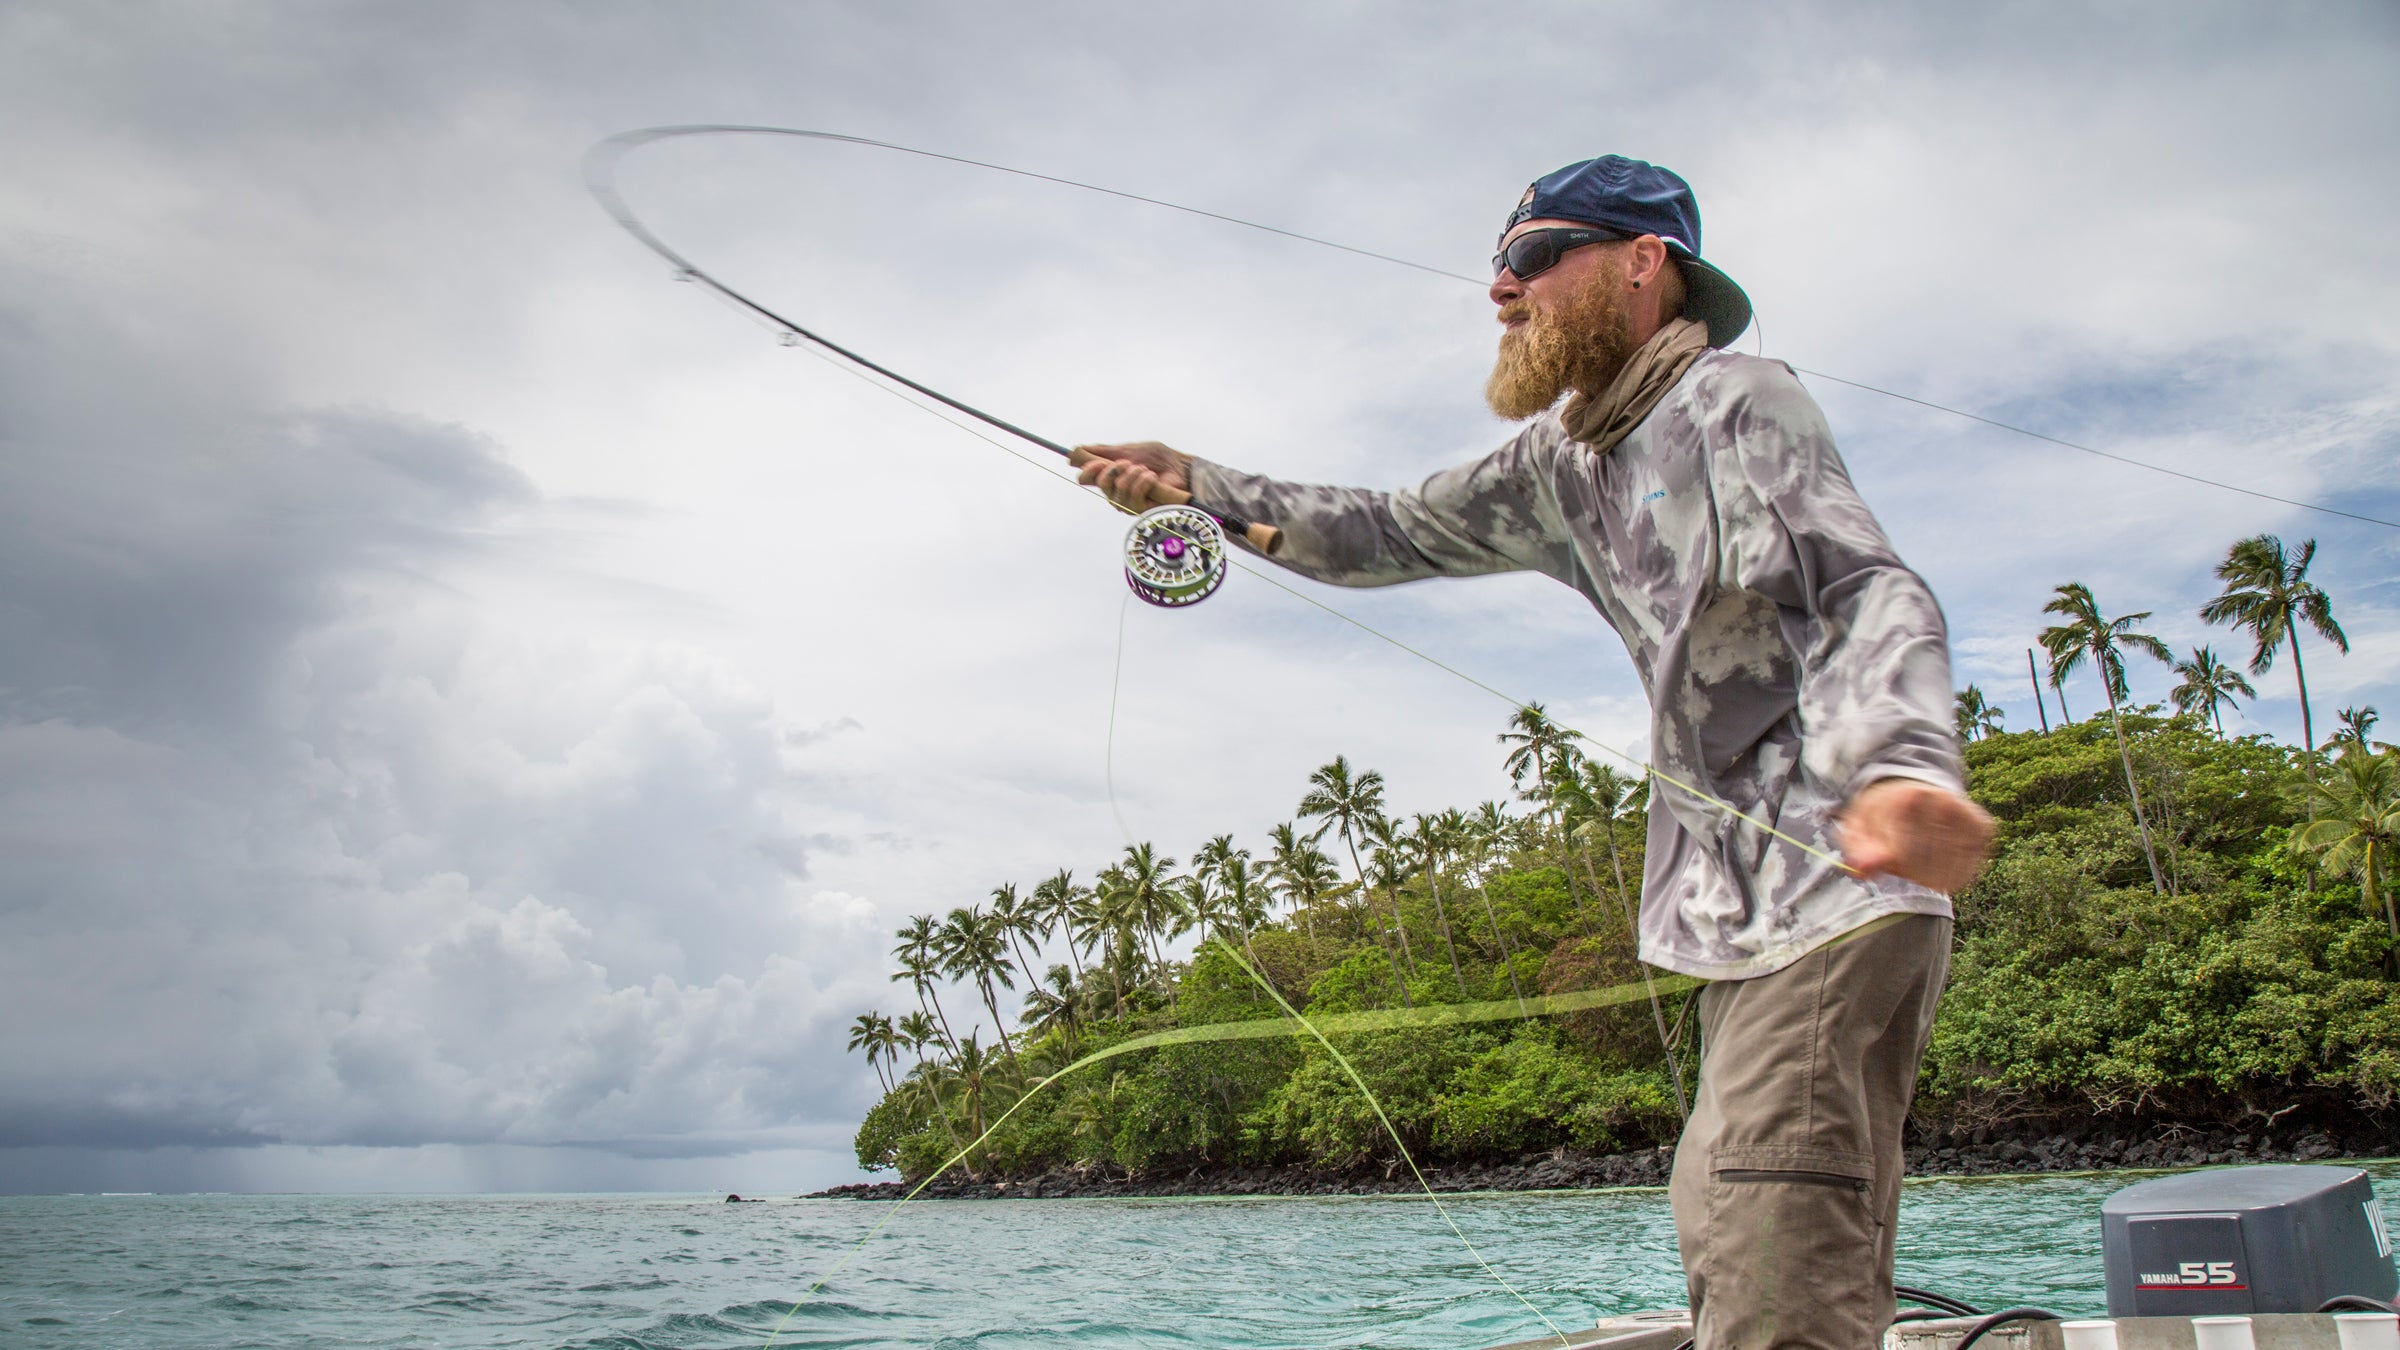 Learn Fly Fishing - Watch These Films - Fishing TV, learn fly